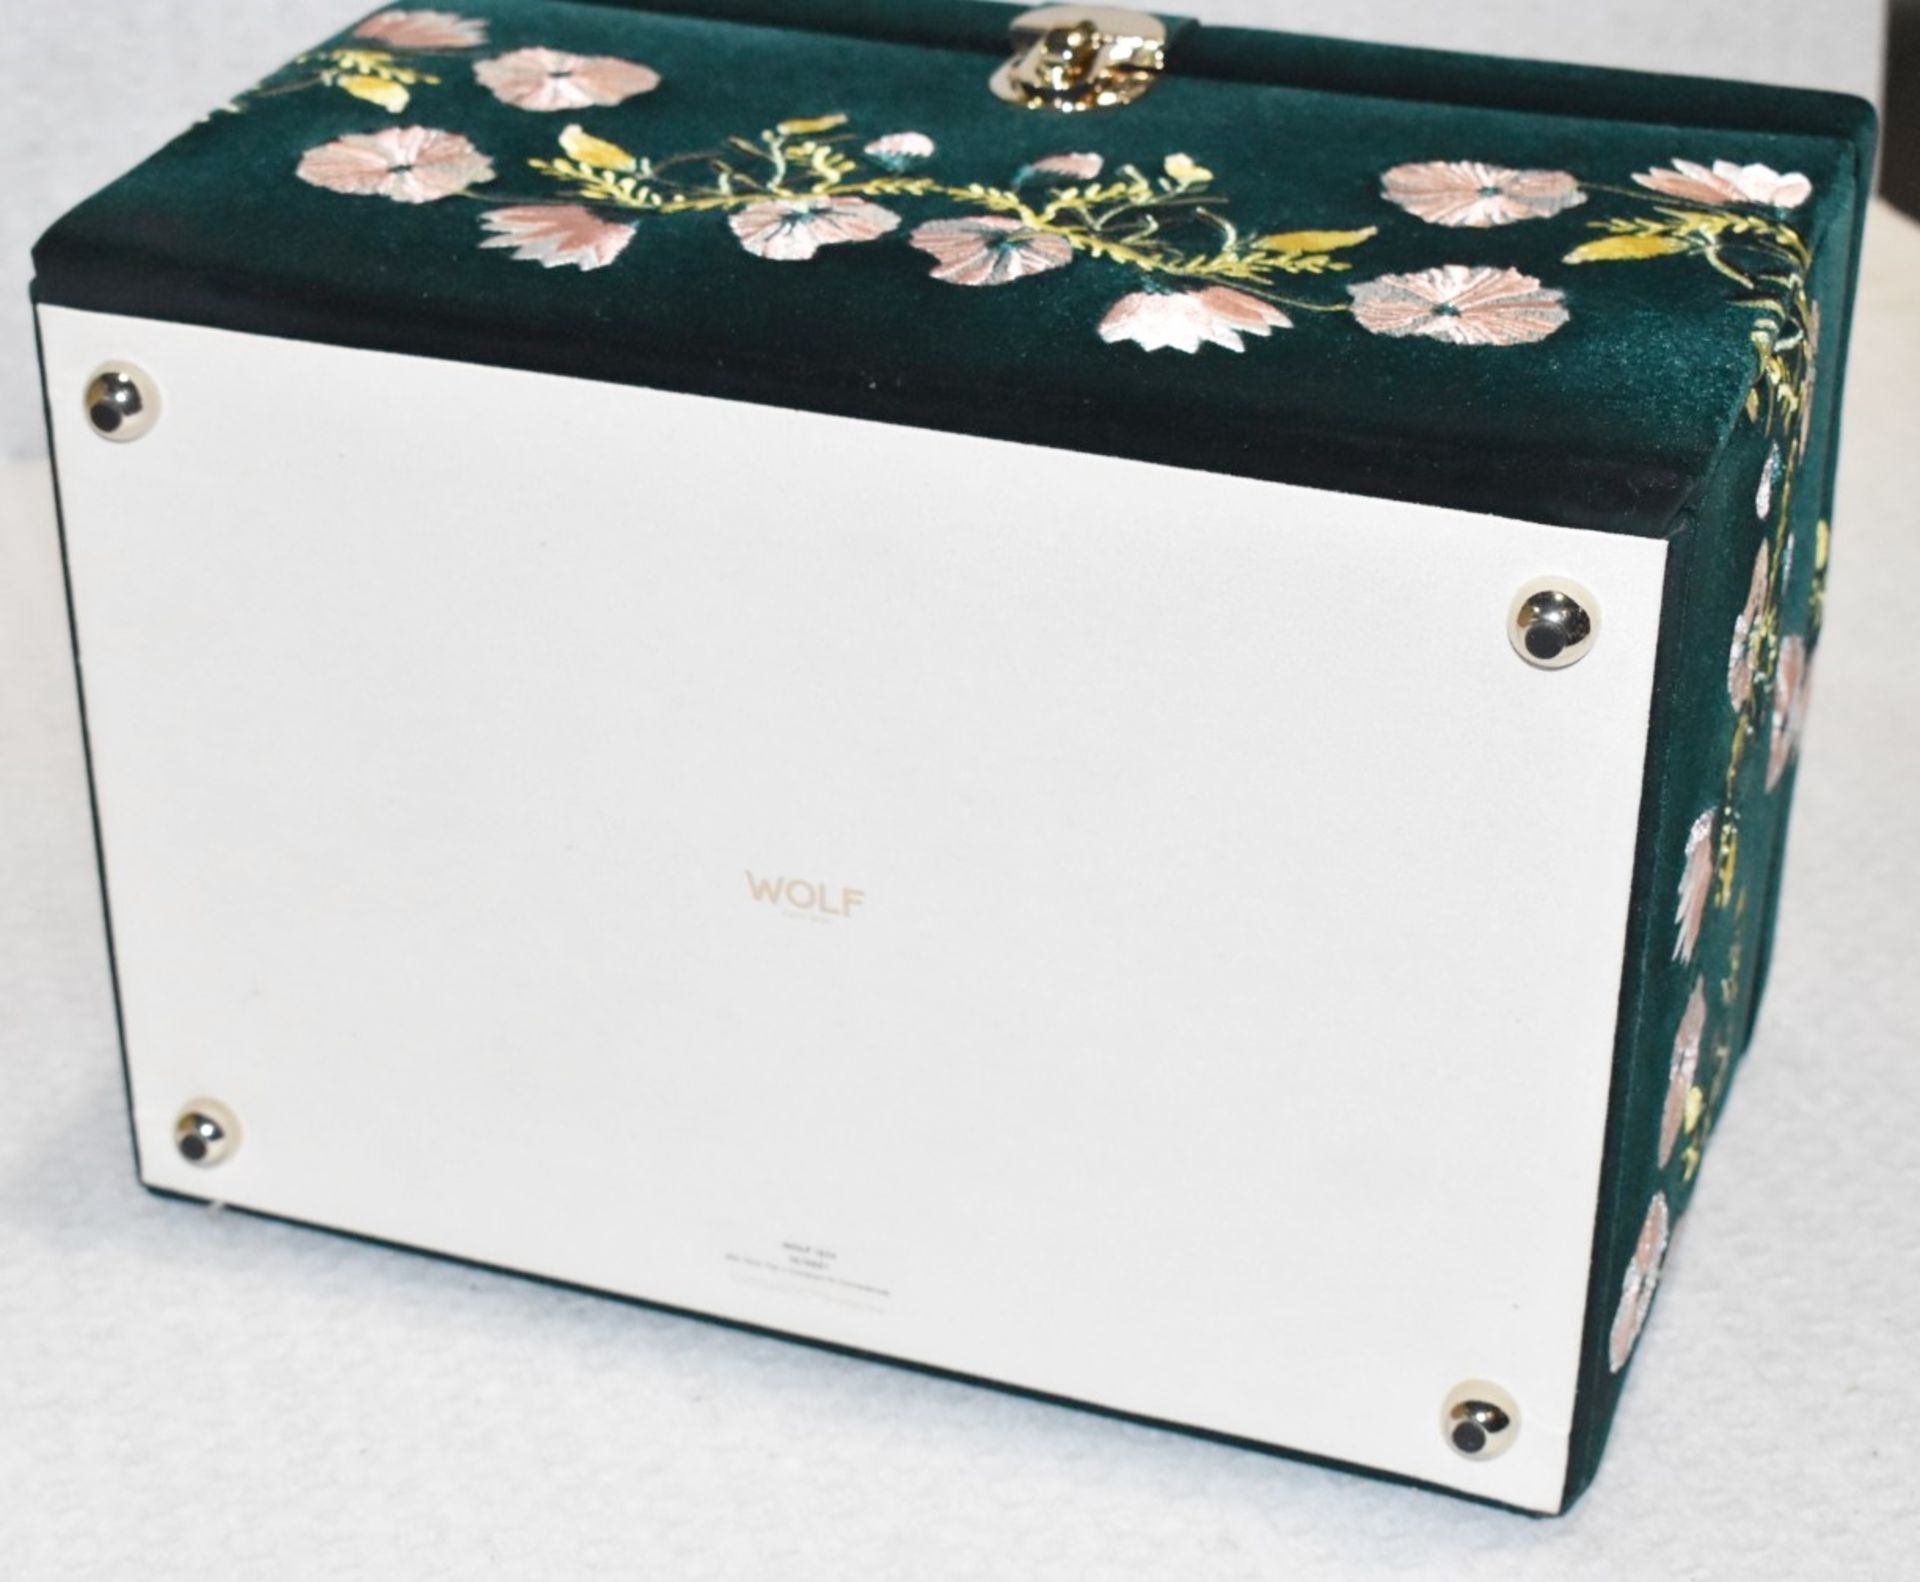 1 x WOLF 'Zoe' Large Luxury Embroidered Jewellery Box, Upholstered in Green Velvet - RRP £739.00 - Image 5 of 10